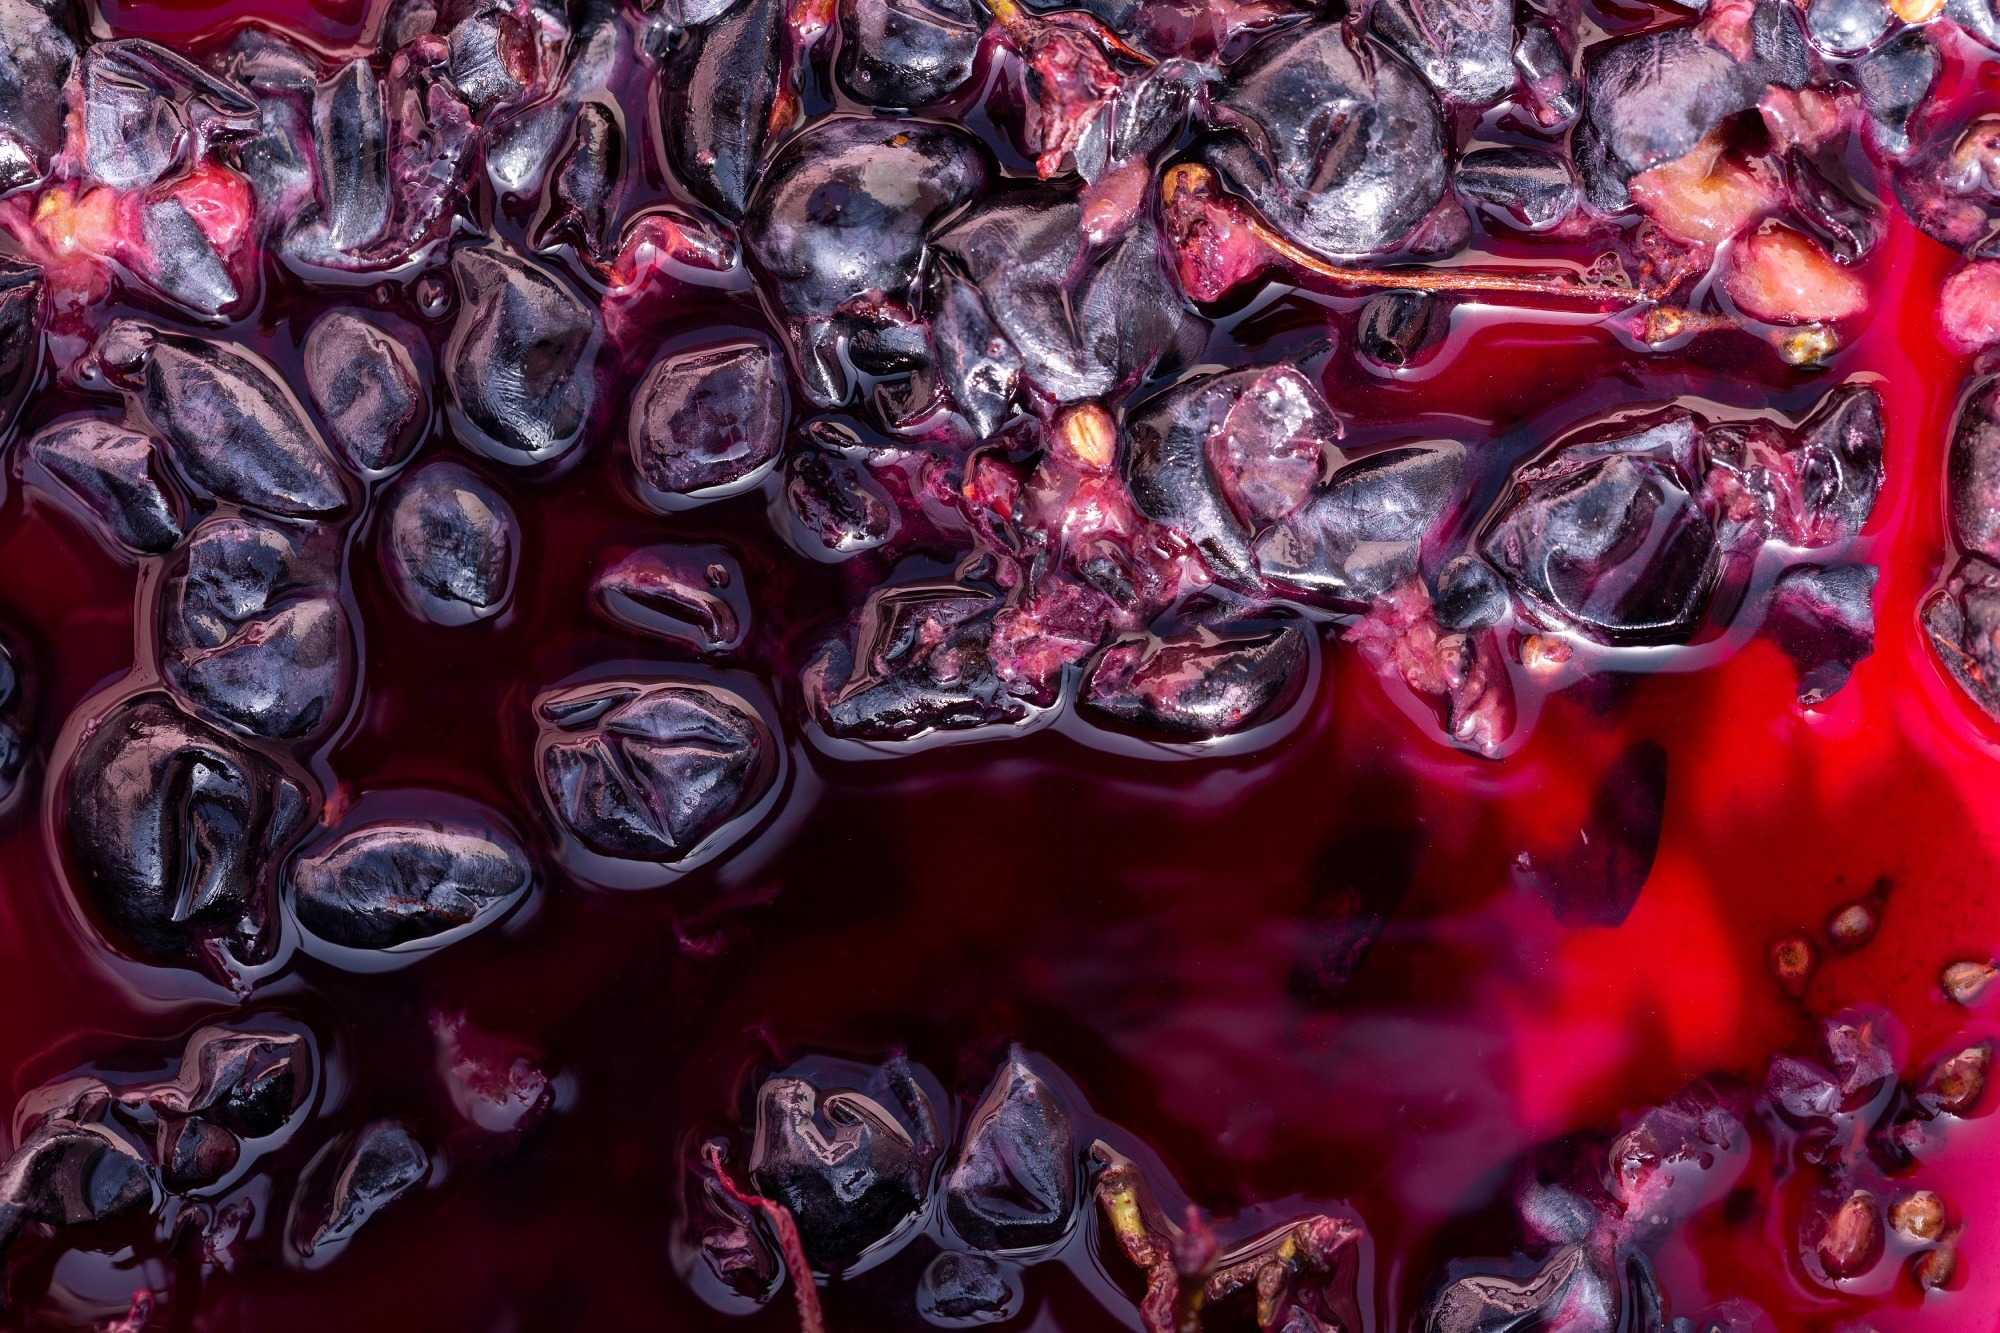 Study: Grape Pomace as a Cardiometabolic Health-Promoting Ingredient: Activity in the Intestinal Environment. Image Credit: PiotrVelixar/Shutterstock.com